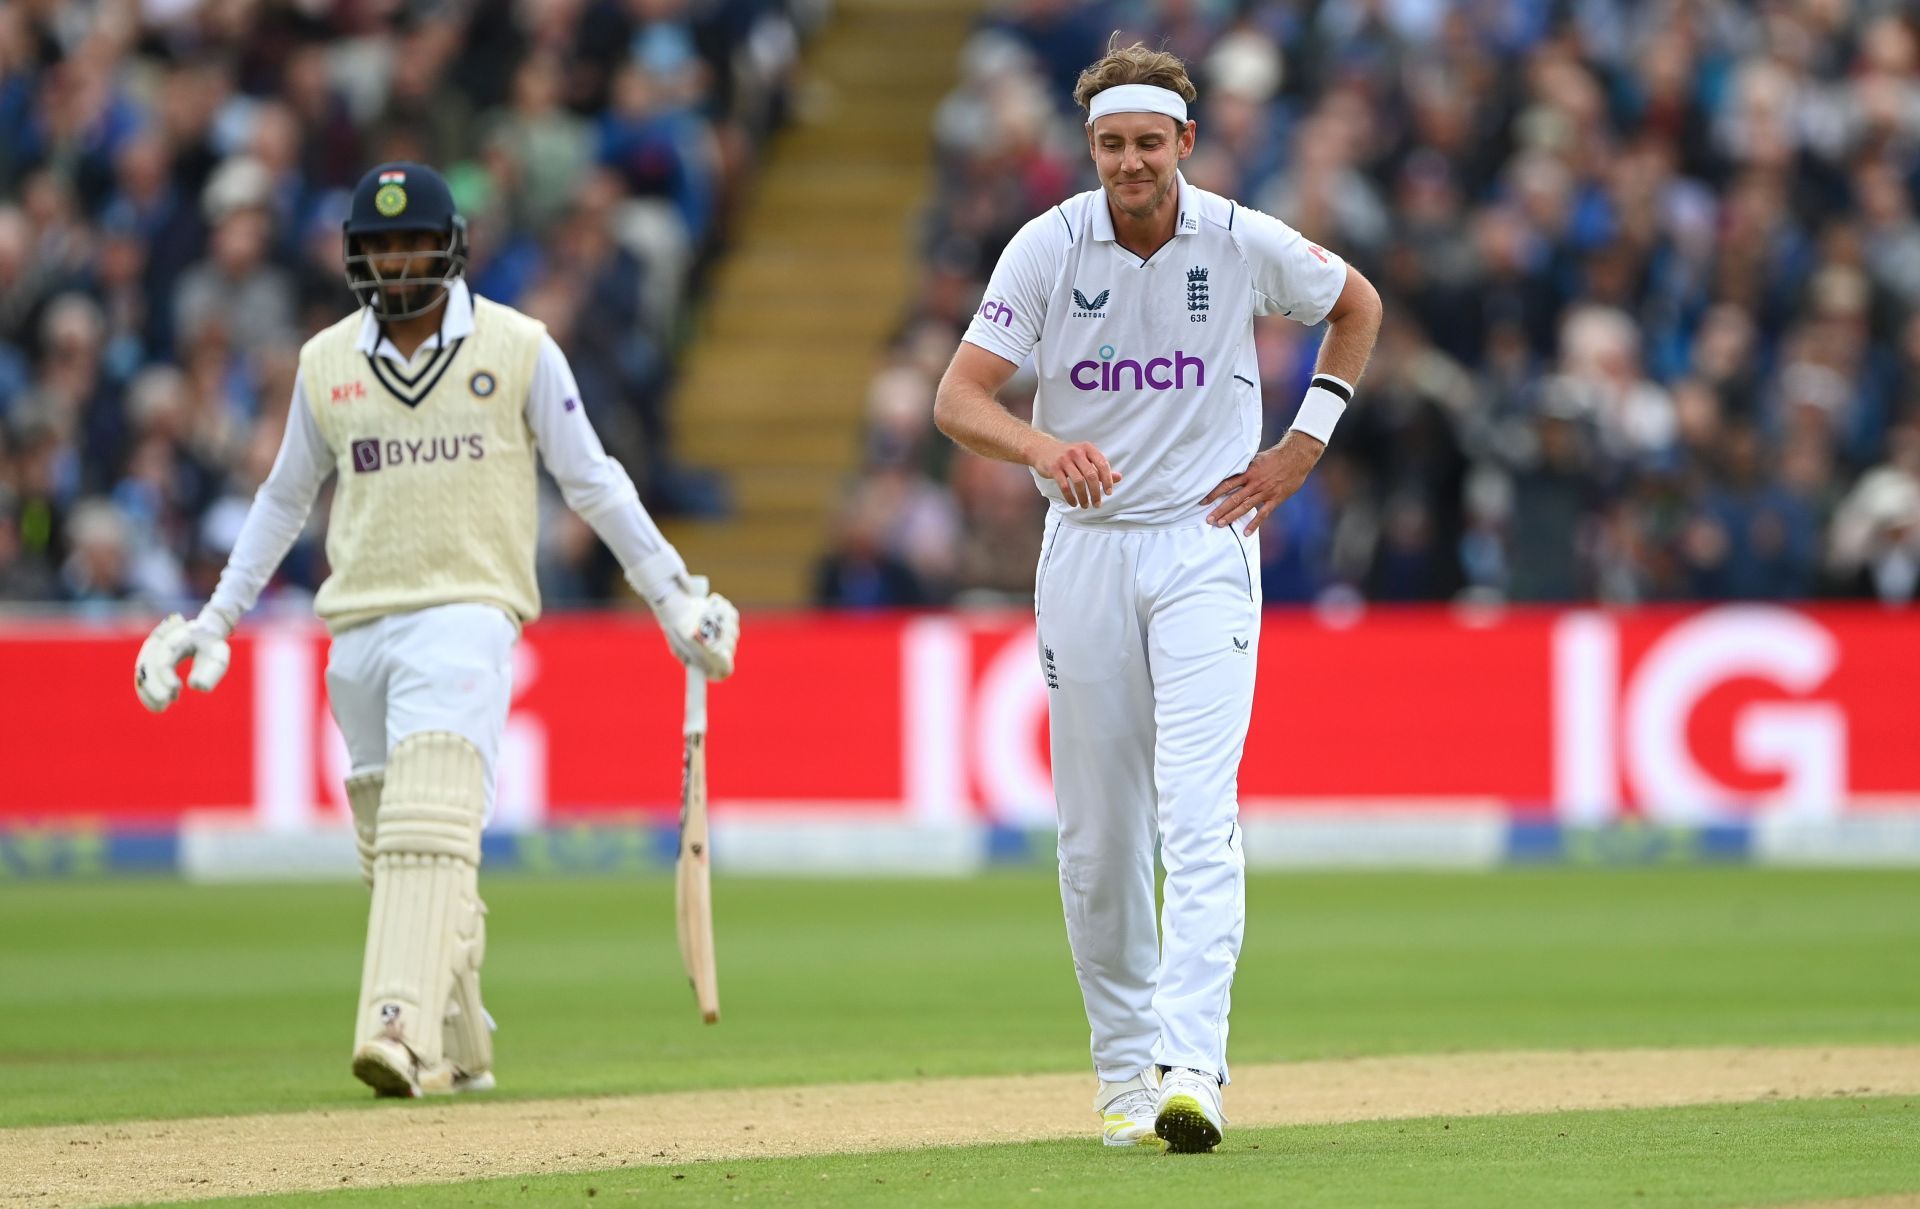 Stuart Broad conceded 35 runs off an over. (Credits: Getty)